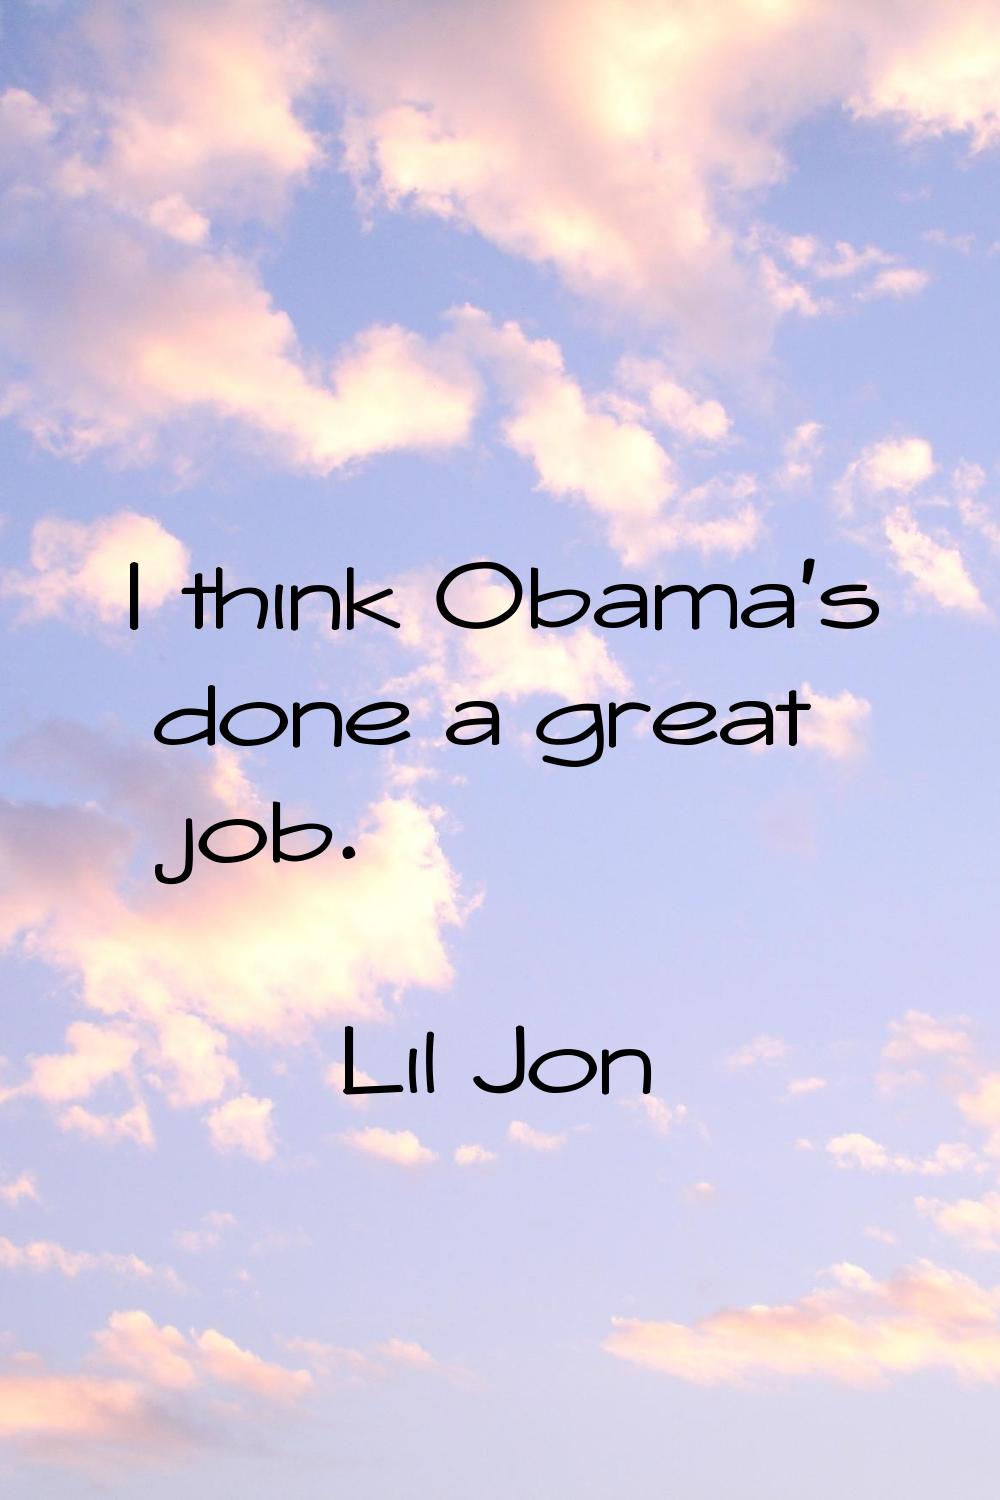 I think Obama's done a great job.